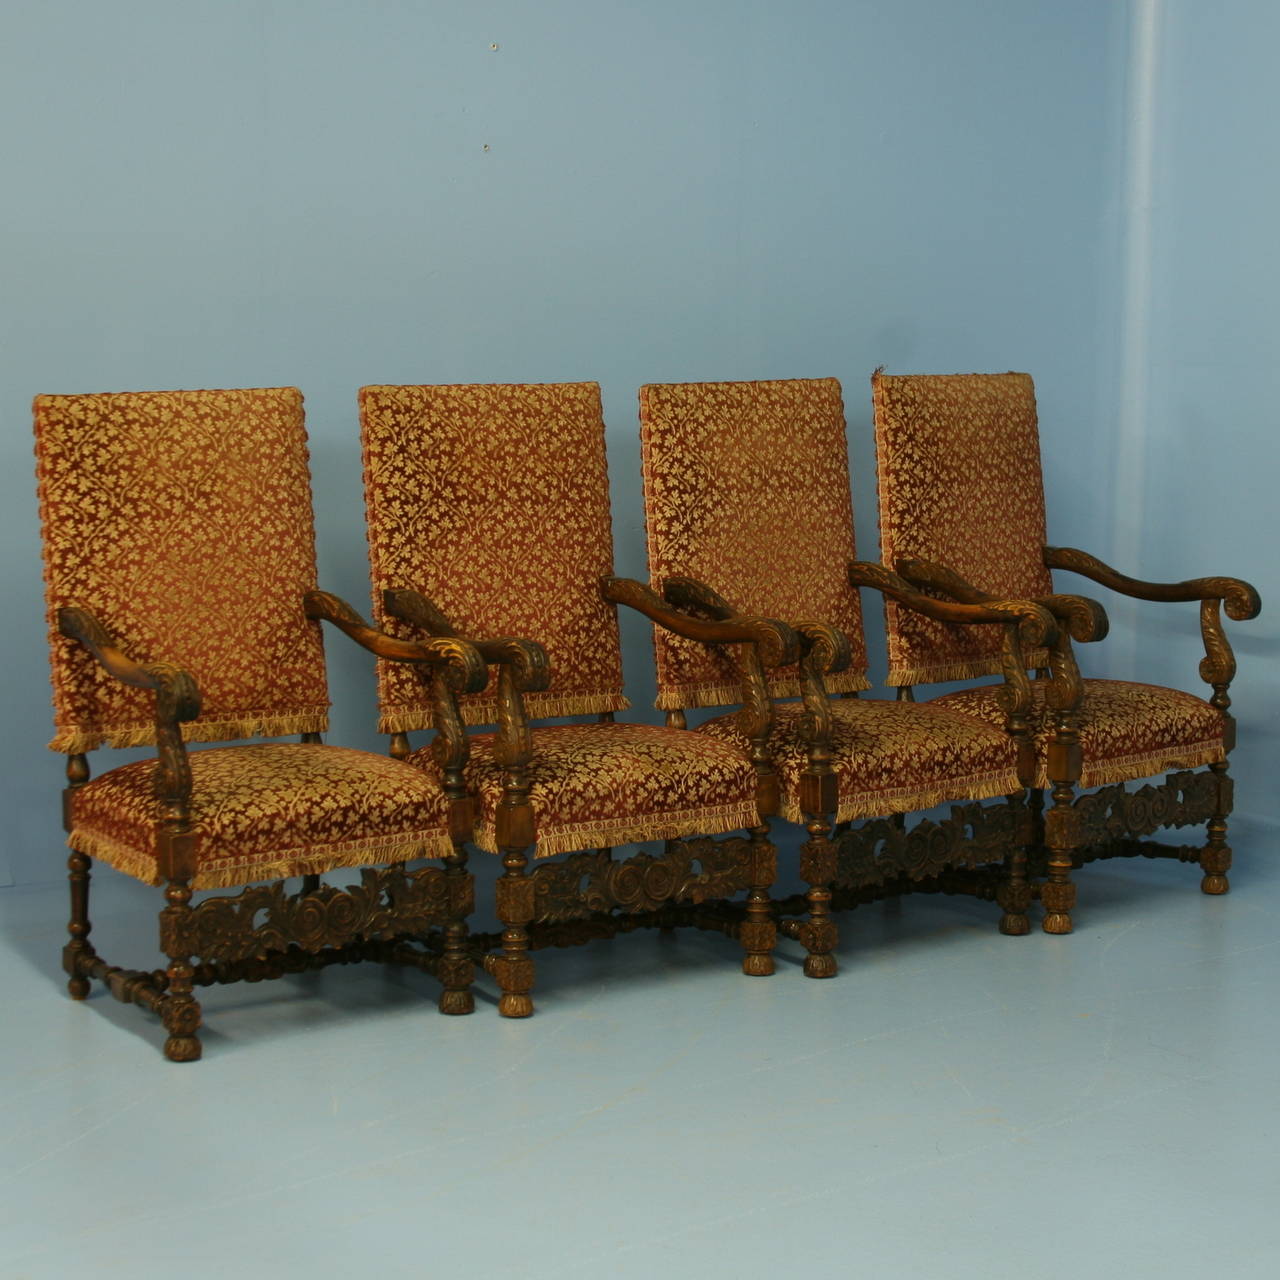 Danish Antique Set of 4 Carved Arm Chairs, Denmark circa 1880-1900